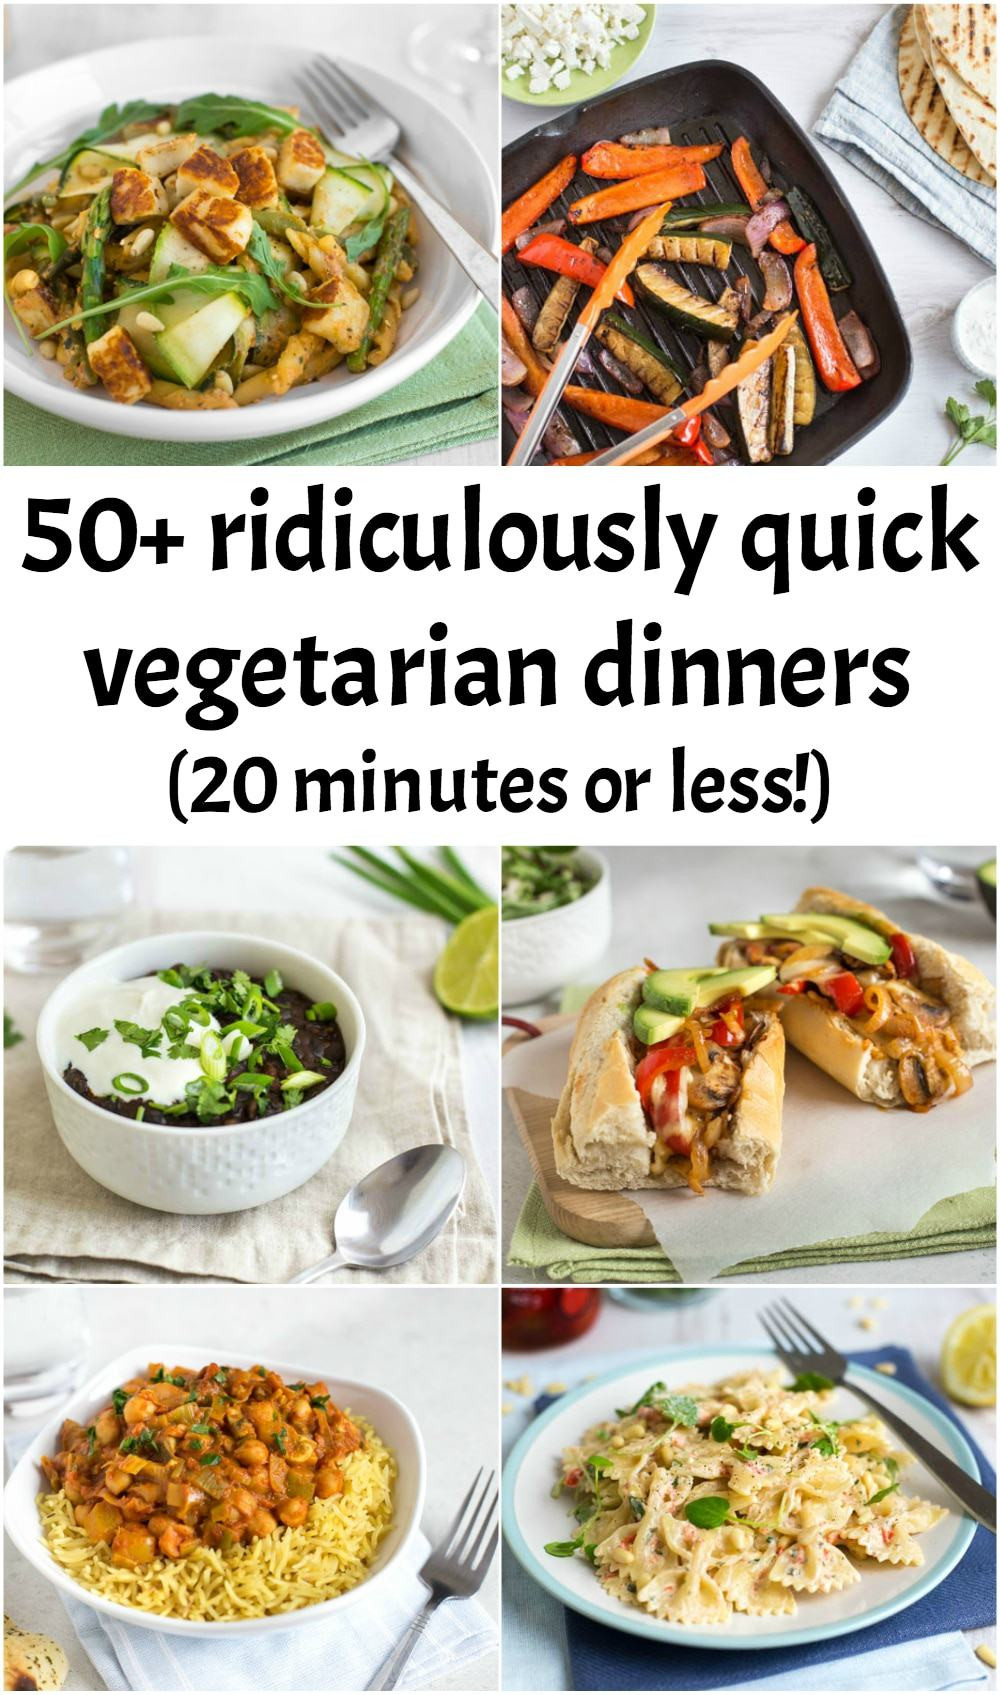 Easy Vegan Dinner Quick
 50 ridiculously quick ve arian dinners 20 minutes or